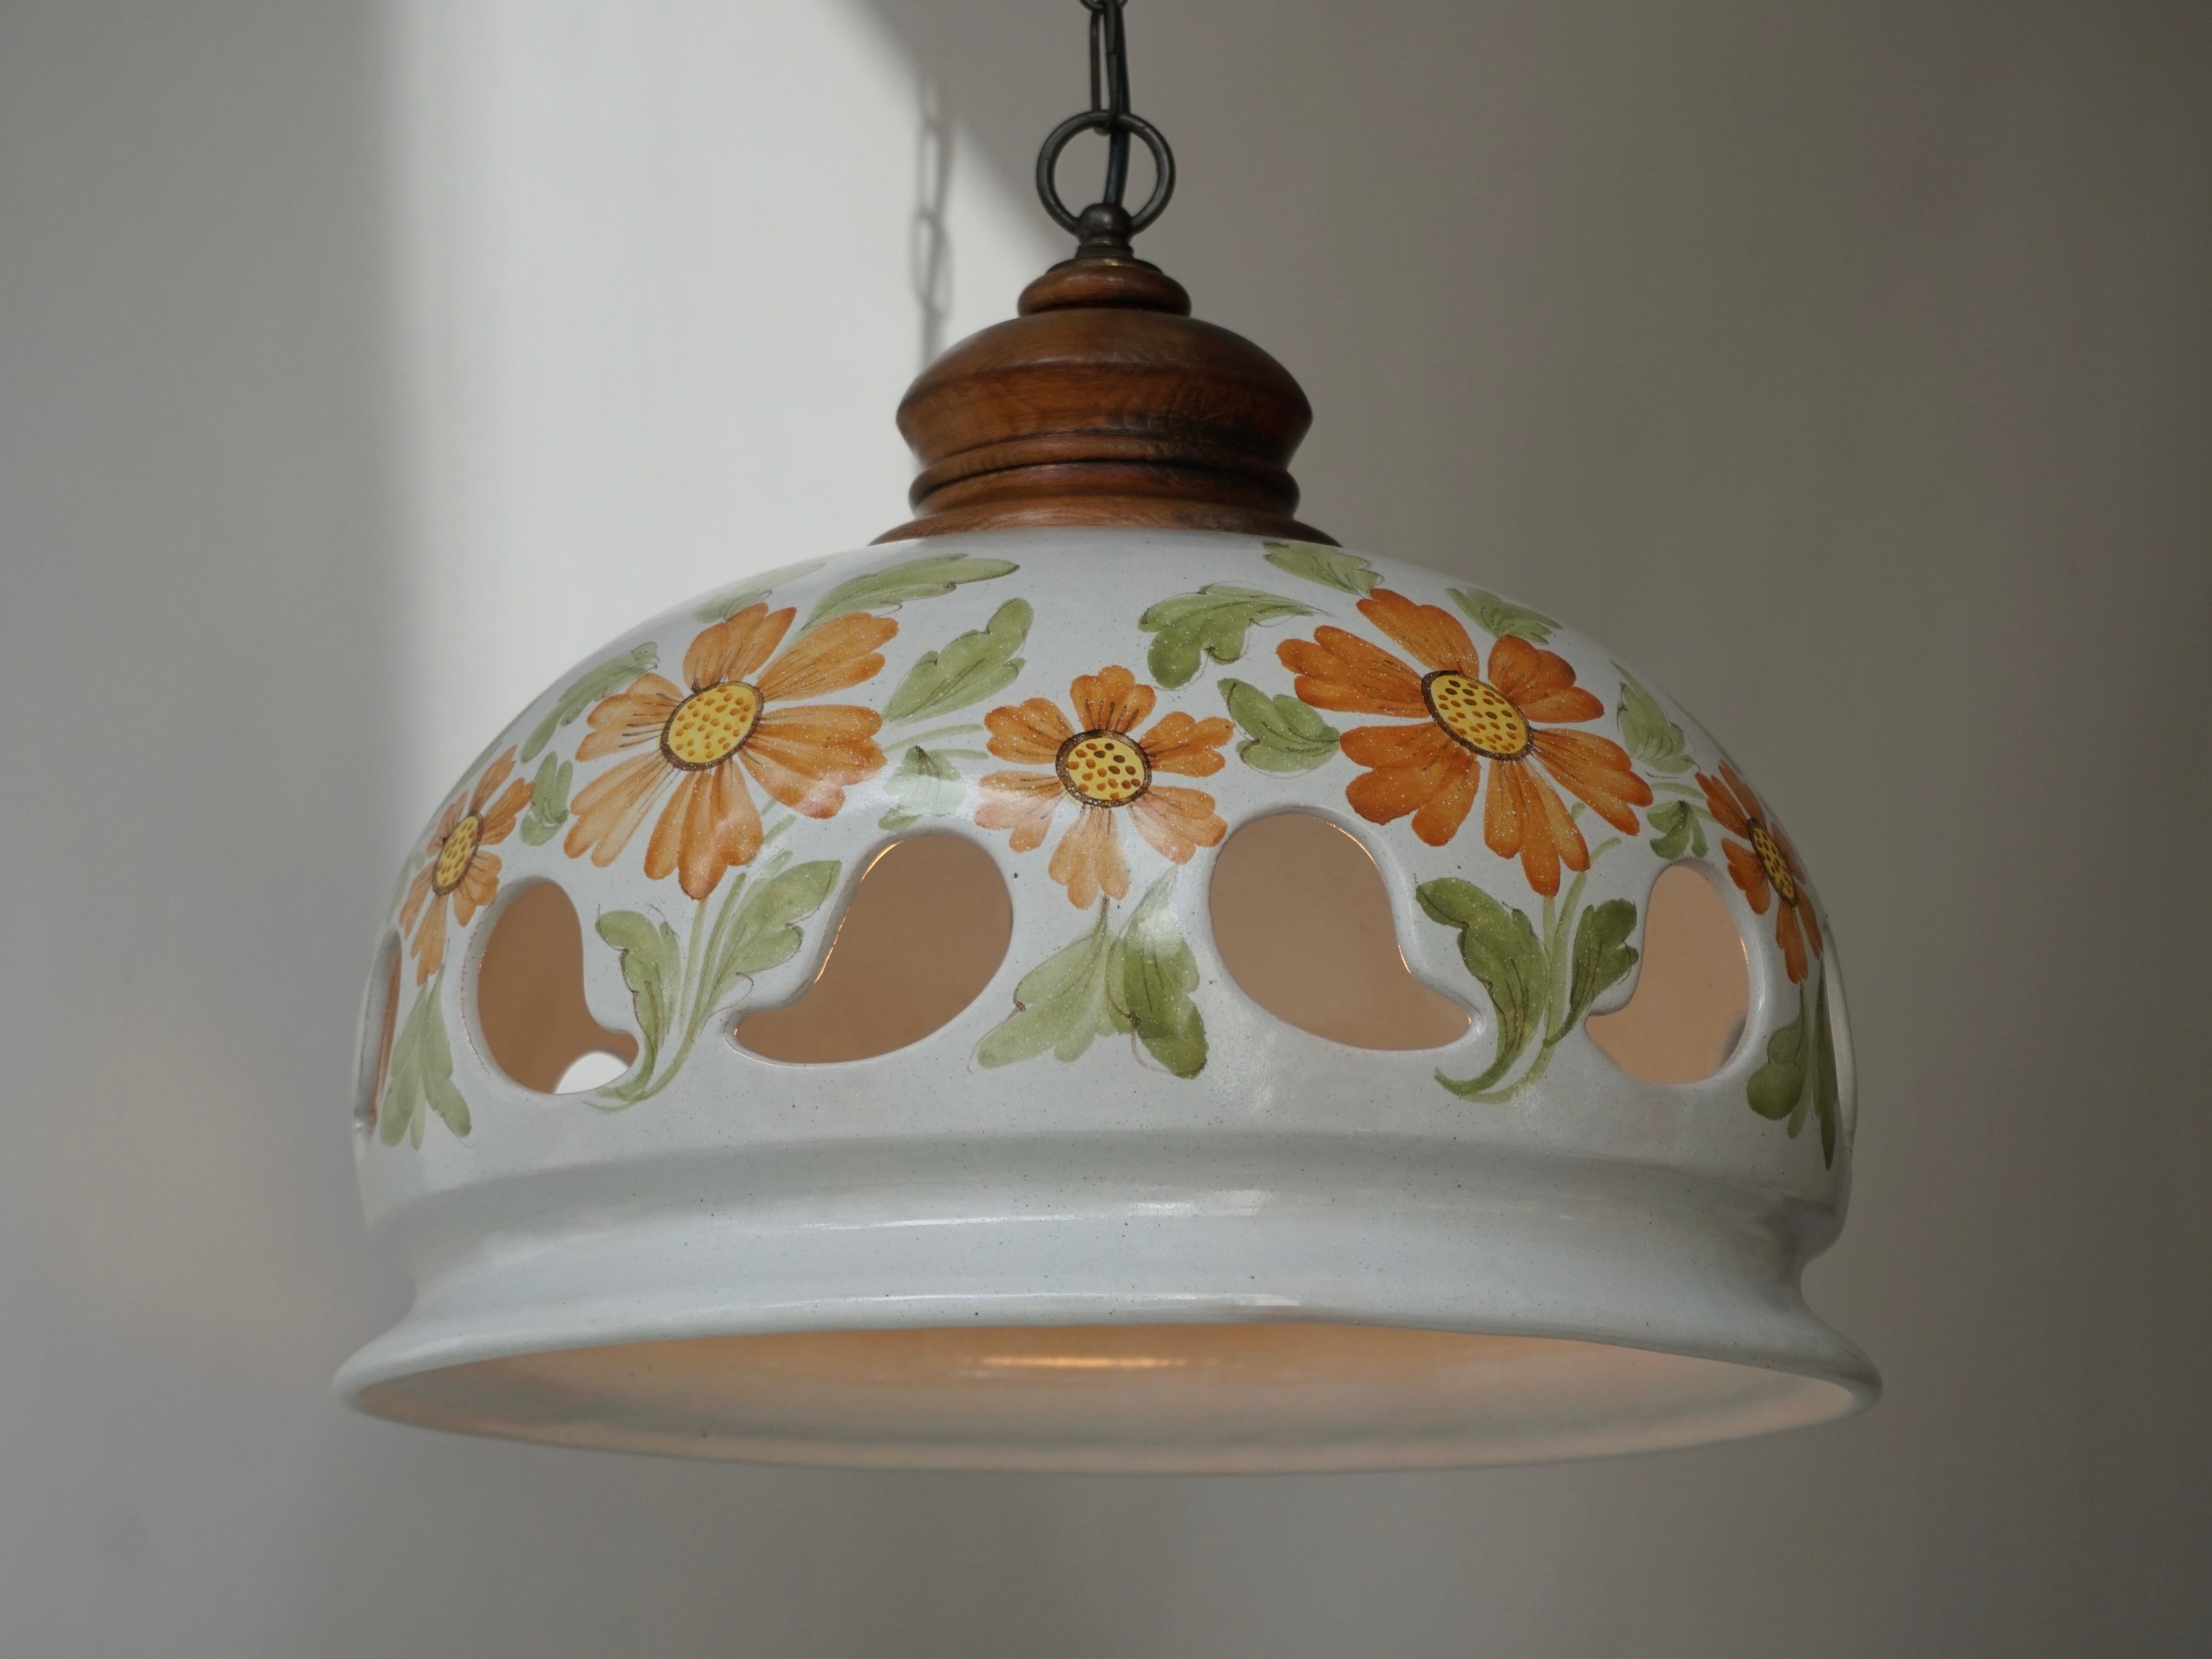 Hand-Painted Italian Ceramic Lamp with Flower Decoration, 1970s For Sale